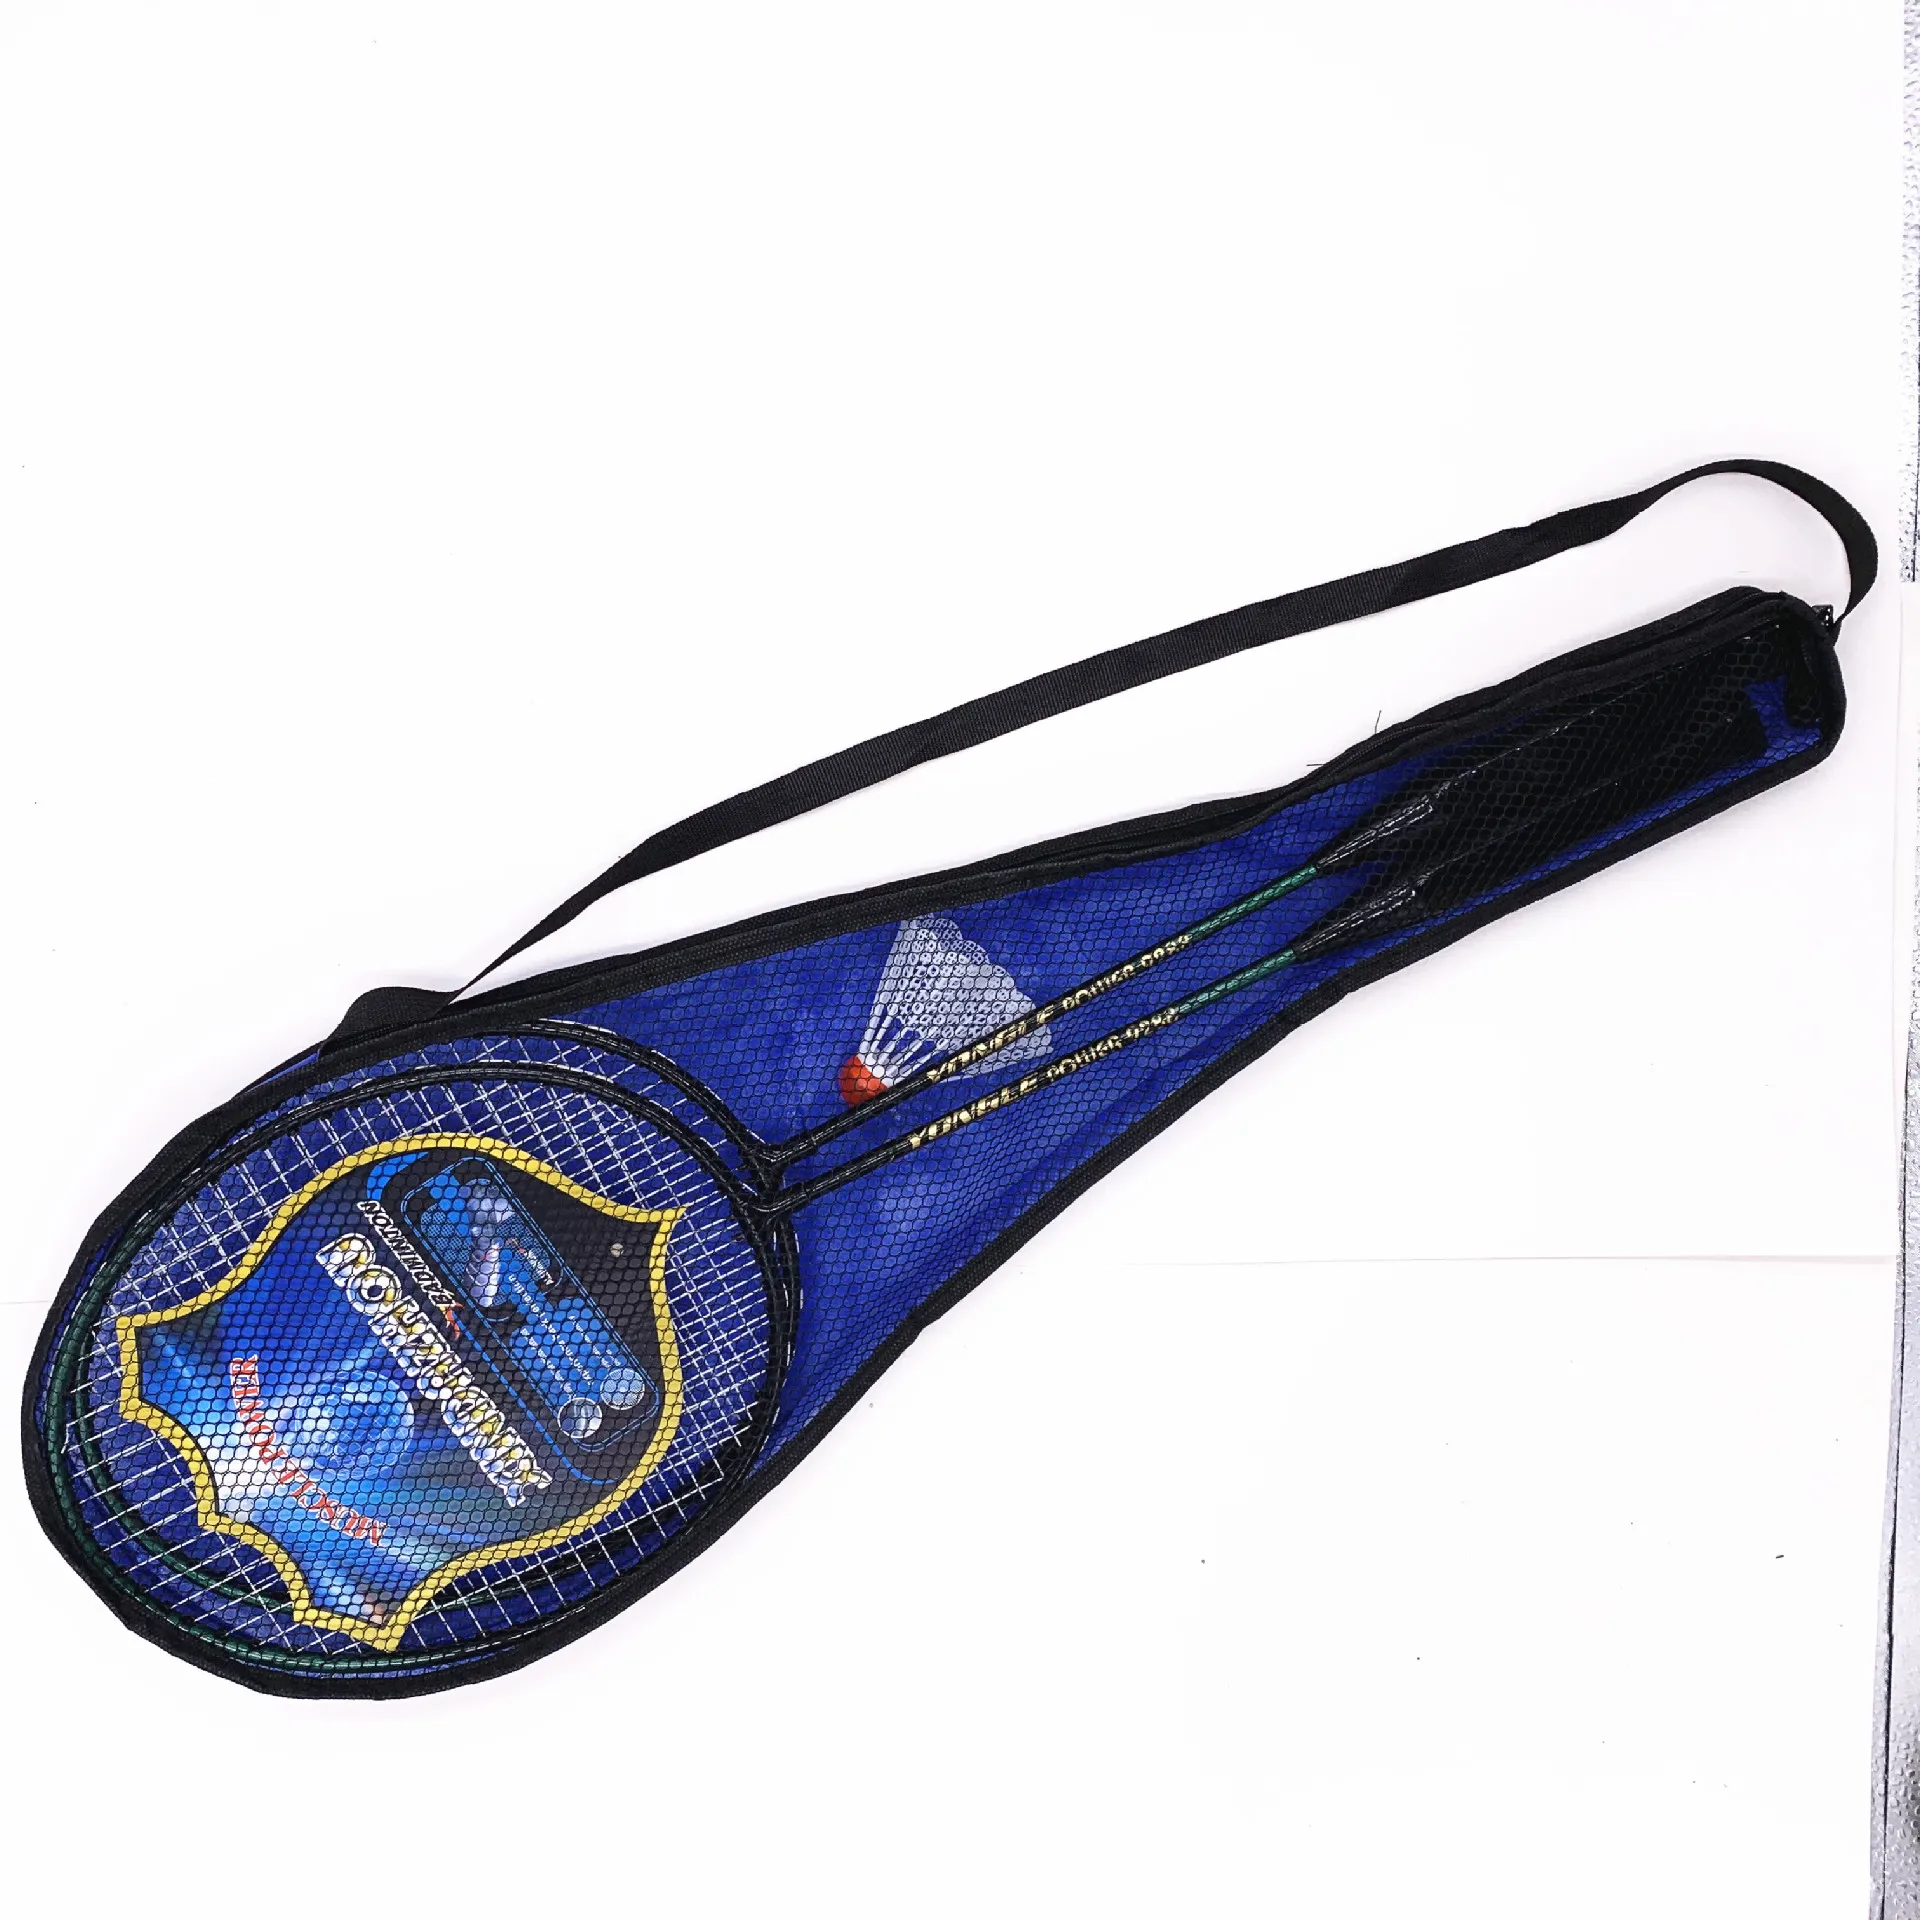 

Iron alloy badminton racket beginners sets of rackets with non woven bag amateur training rackets, Blue